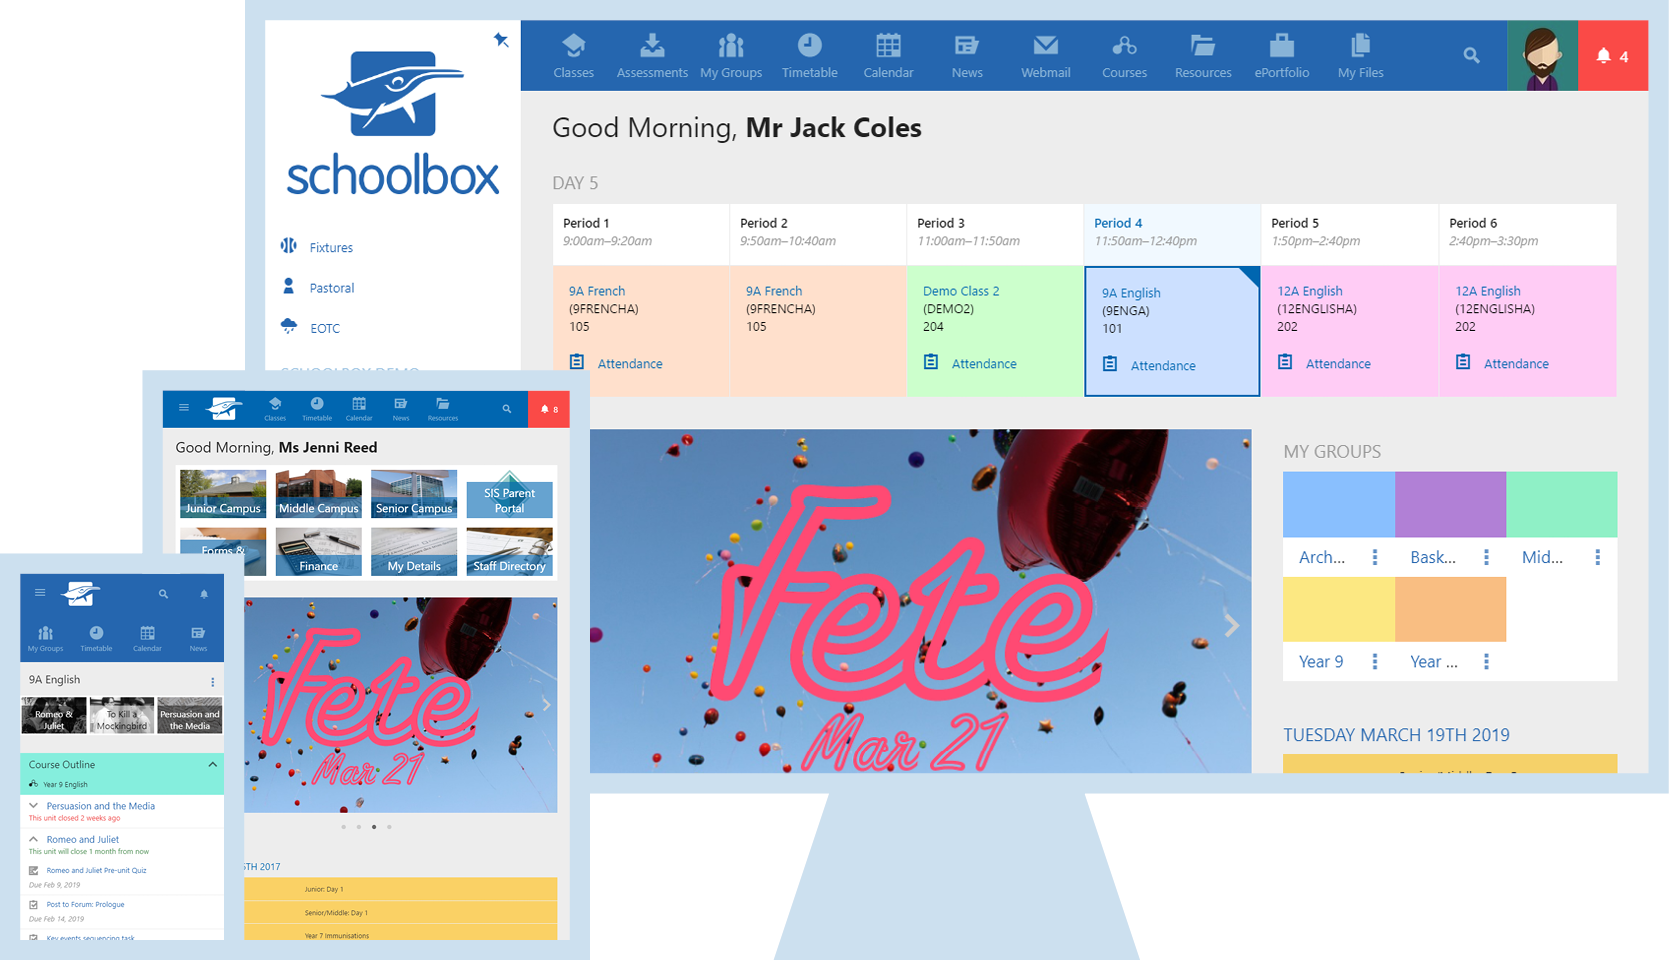 Schoolbox Software - Schoolbox is accessible across all platforms, including desktop, iPhone, and Android